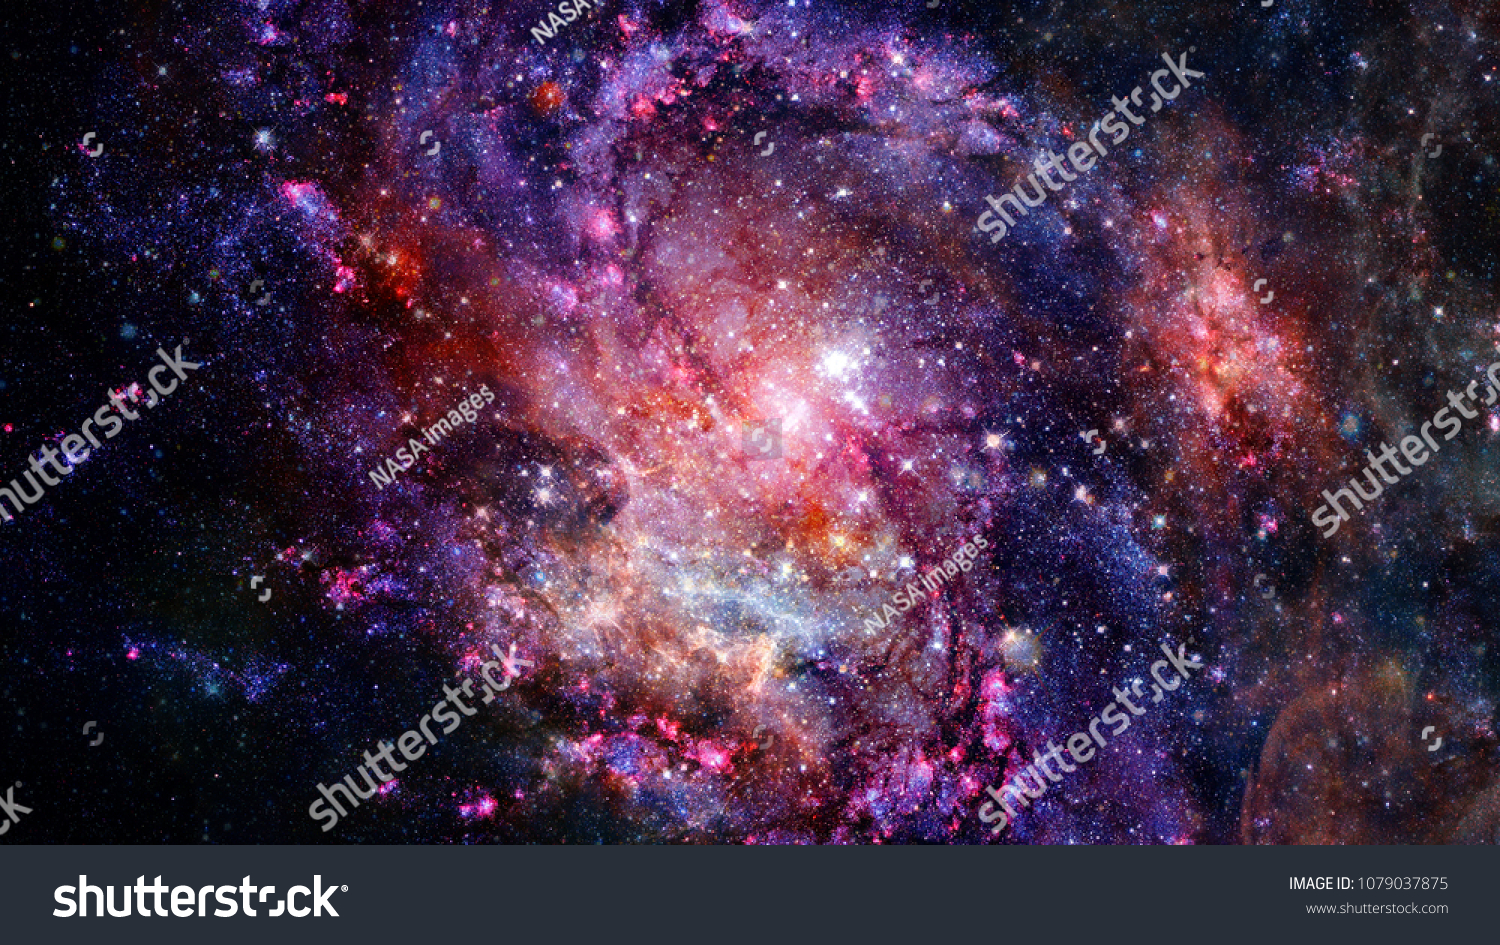 Cosmic galaxy background with nebula, stardust and bright shining stars. Elements of this image furnished by NASA. #1079037875